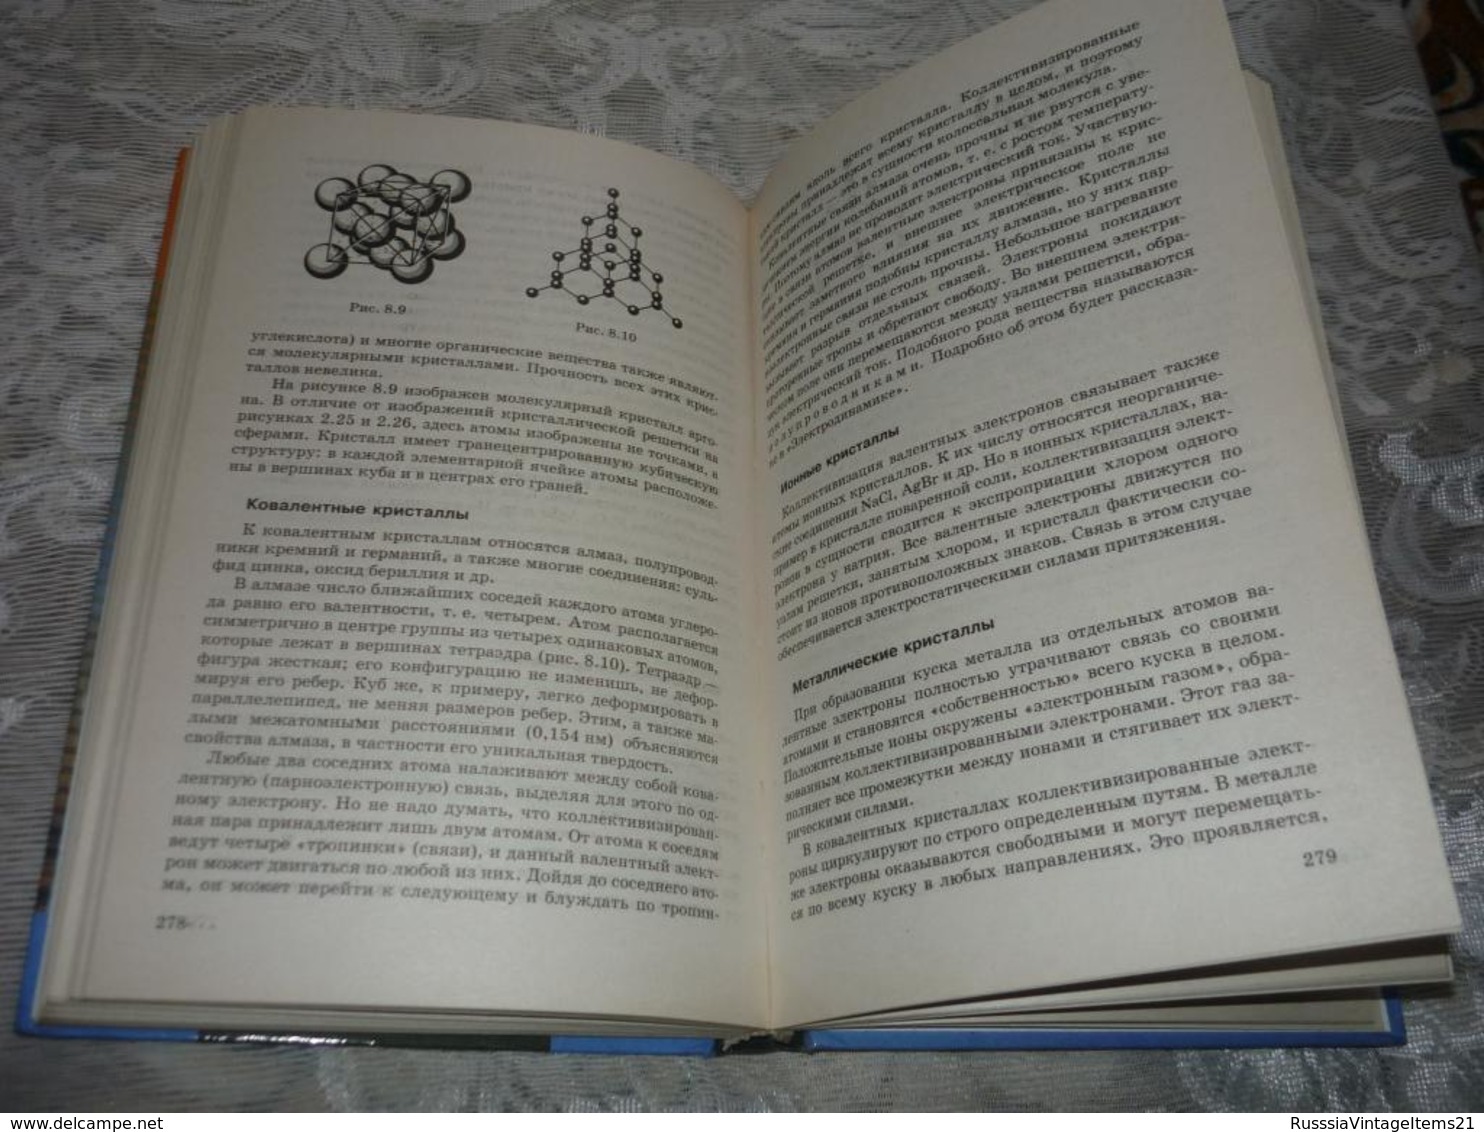 Russian textbook - in Russian - textbook from Russia - Myakishev G. Sinyakov A. Physics: Molecular Physics. Thermodynami